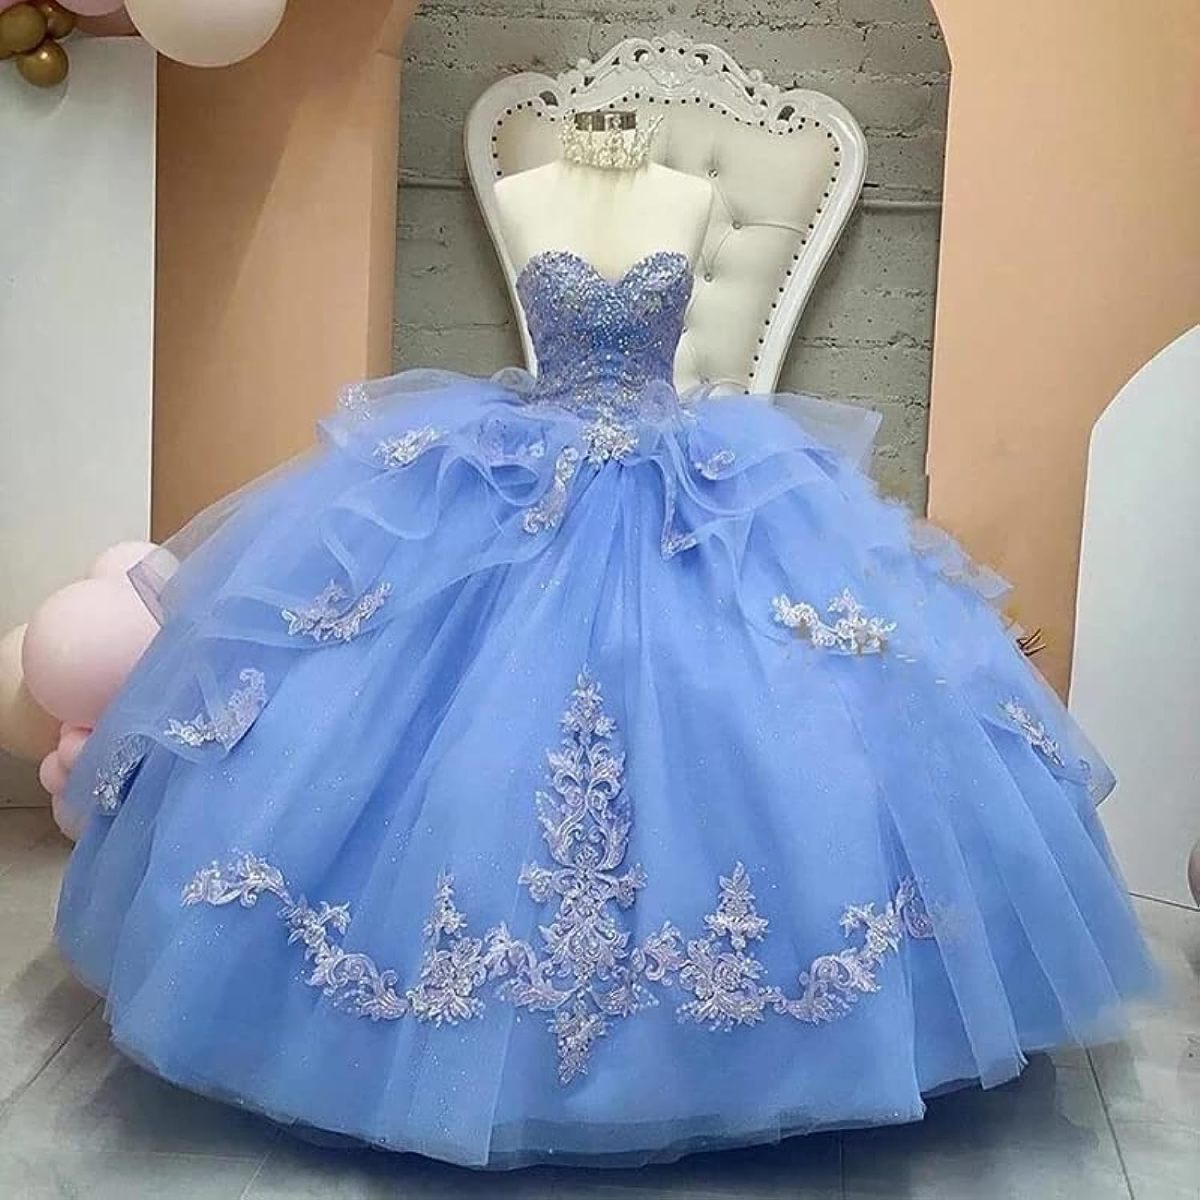 Quinceanera Dresses What to Wear? - HubPages